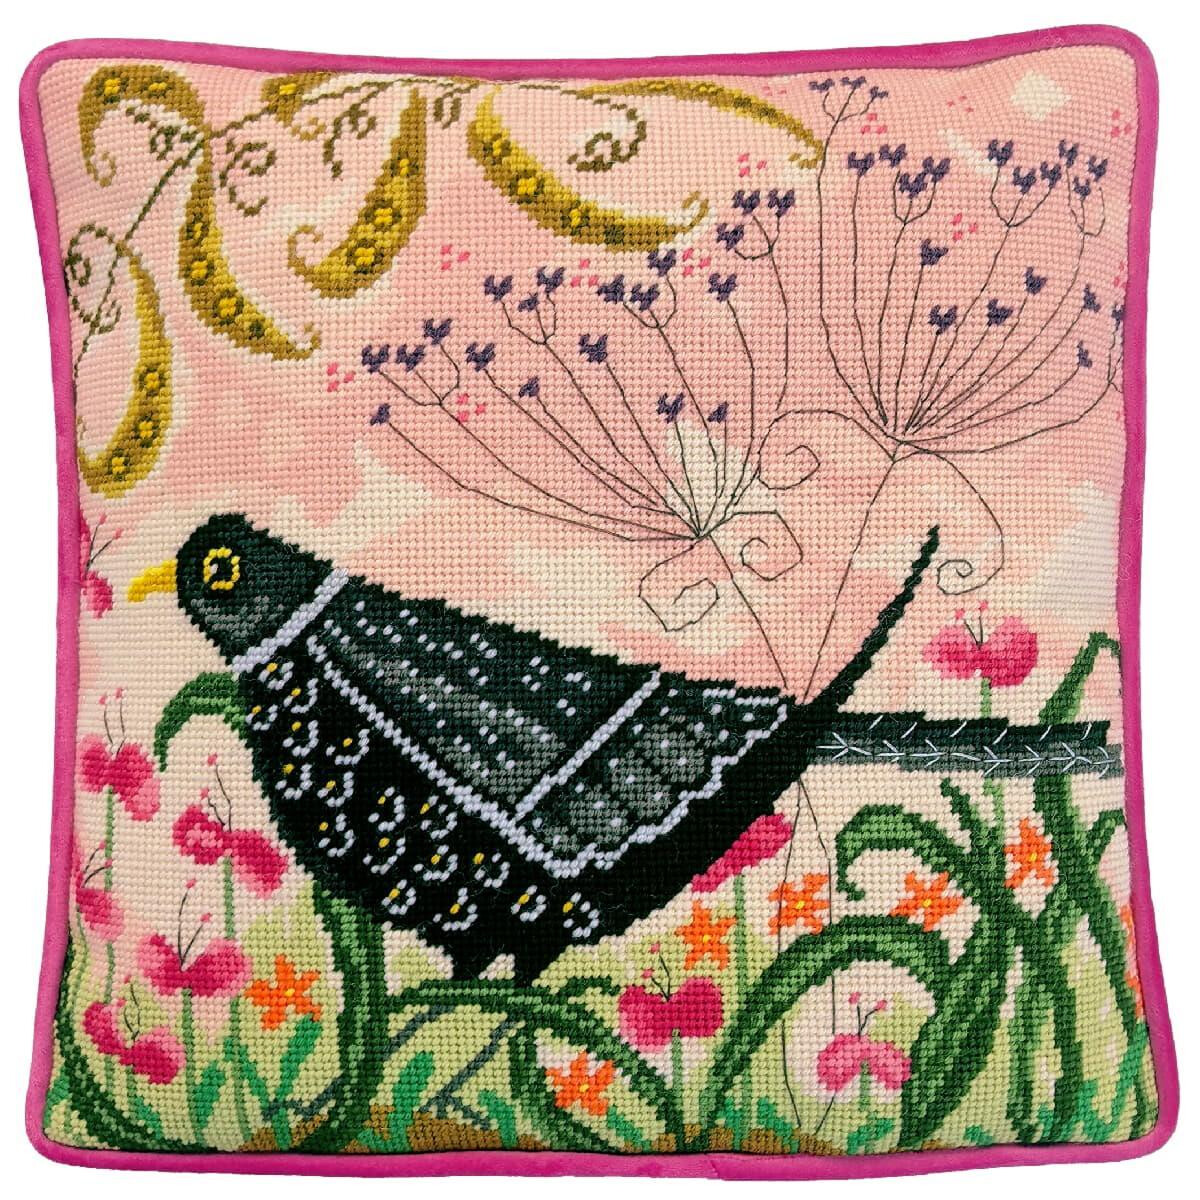 A square cushion with a colorful embroidery of a black...